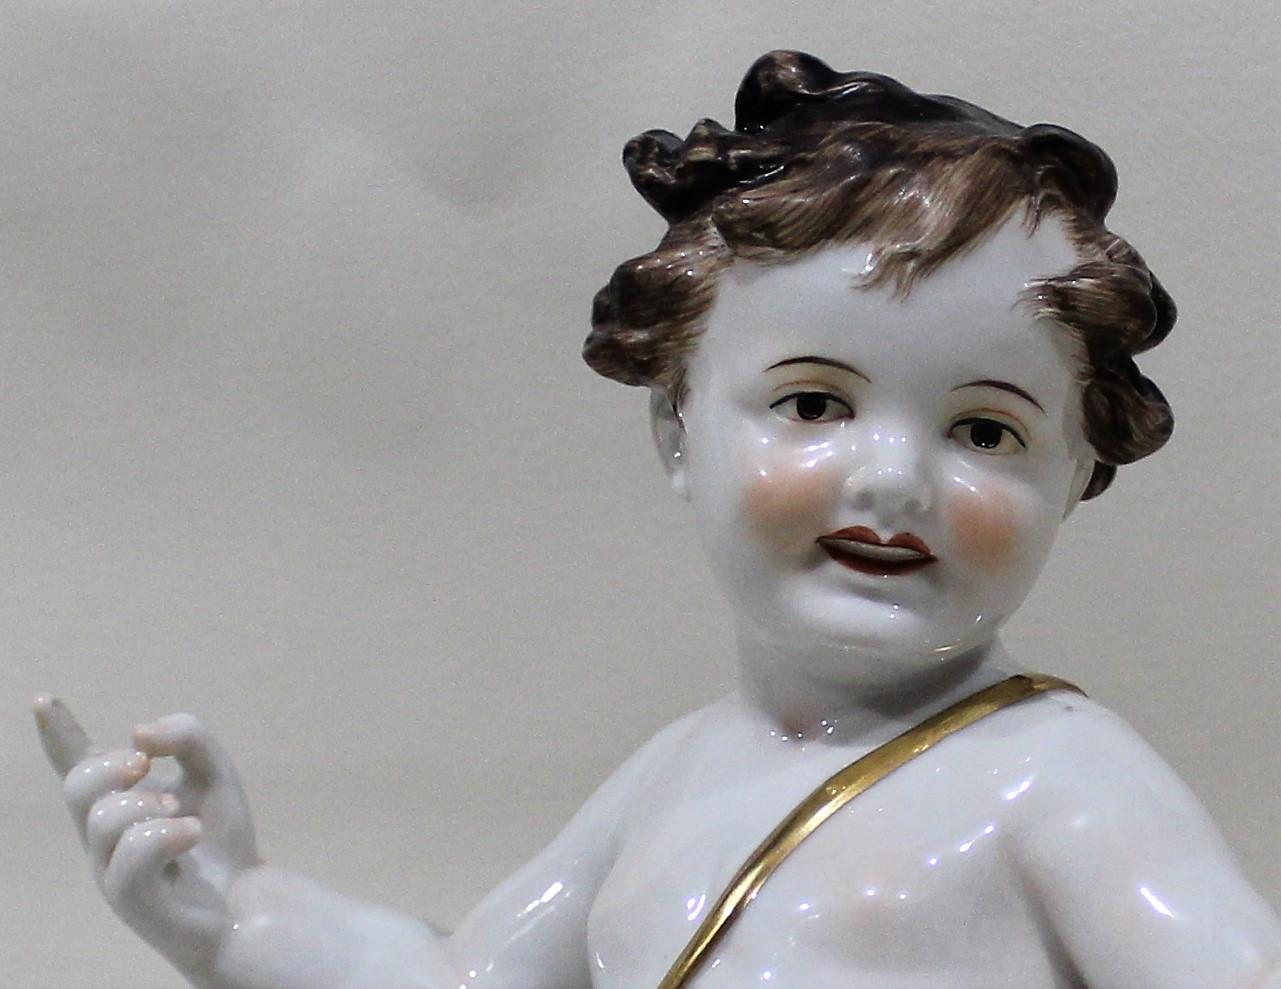 19th Century 18th Century Ludwigsburg Porcelain Figure of Young Bacchus from Roman Mythology